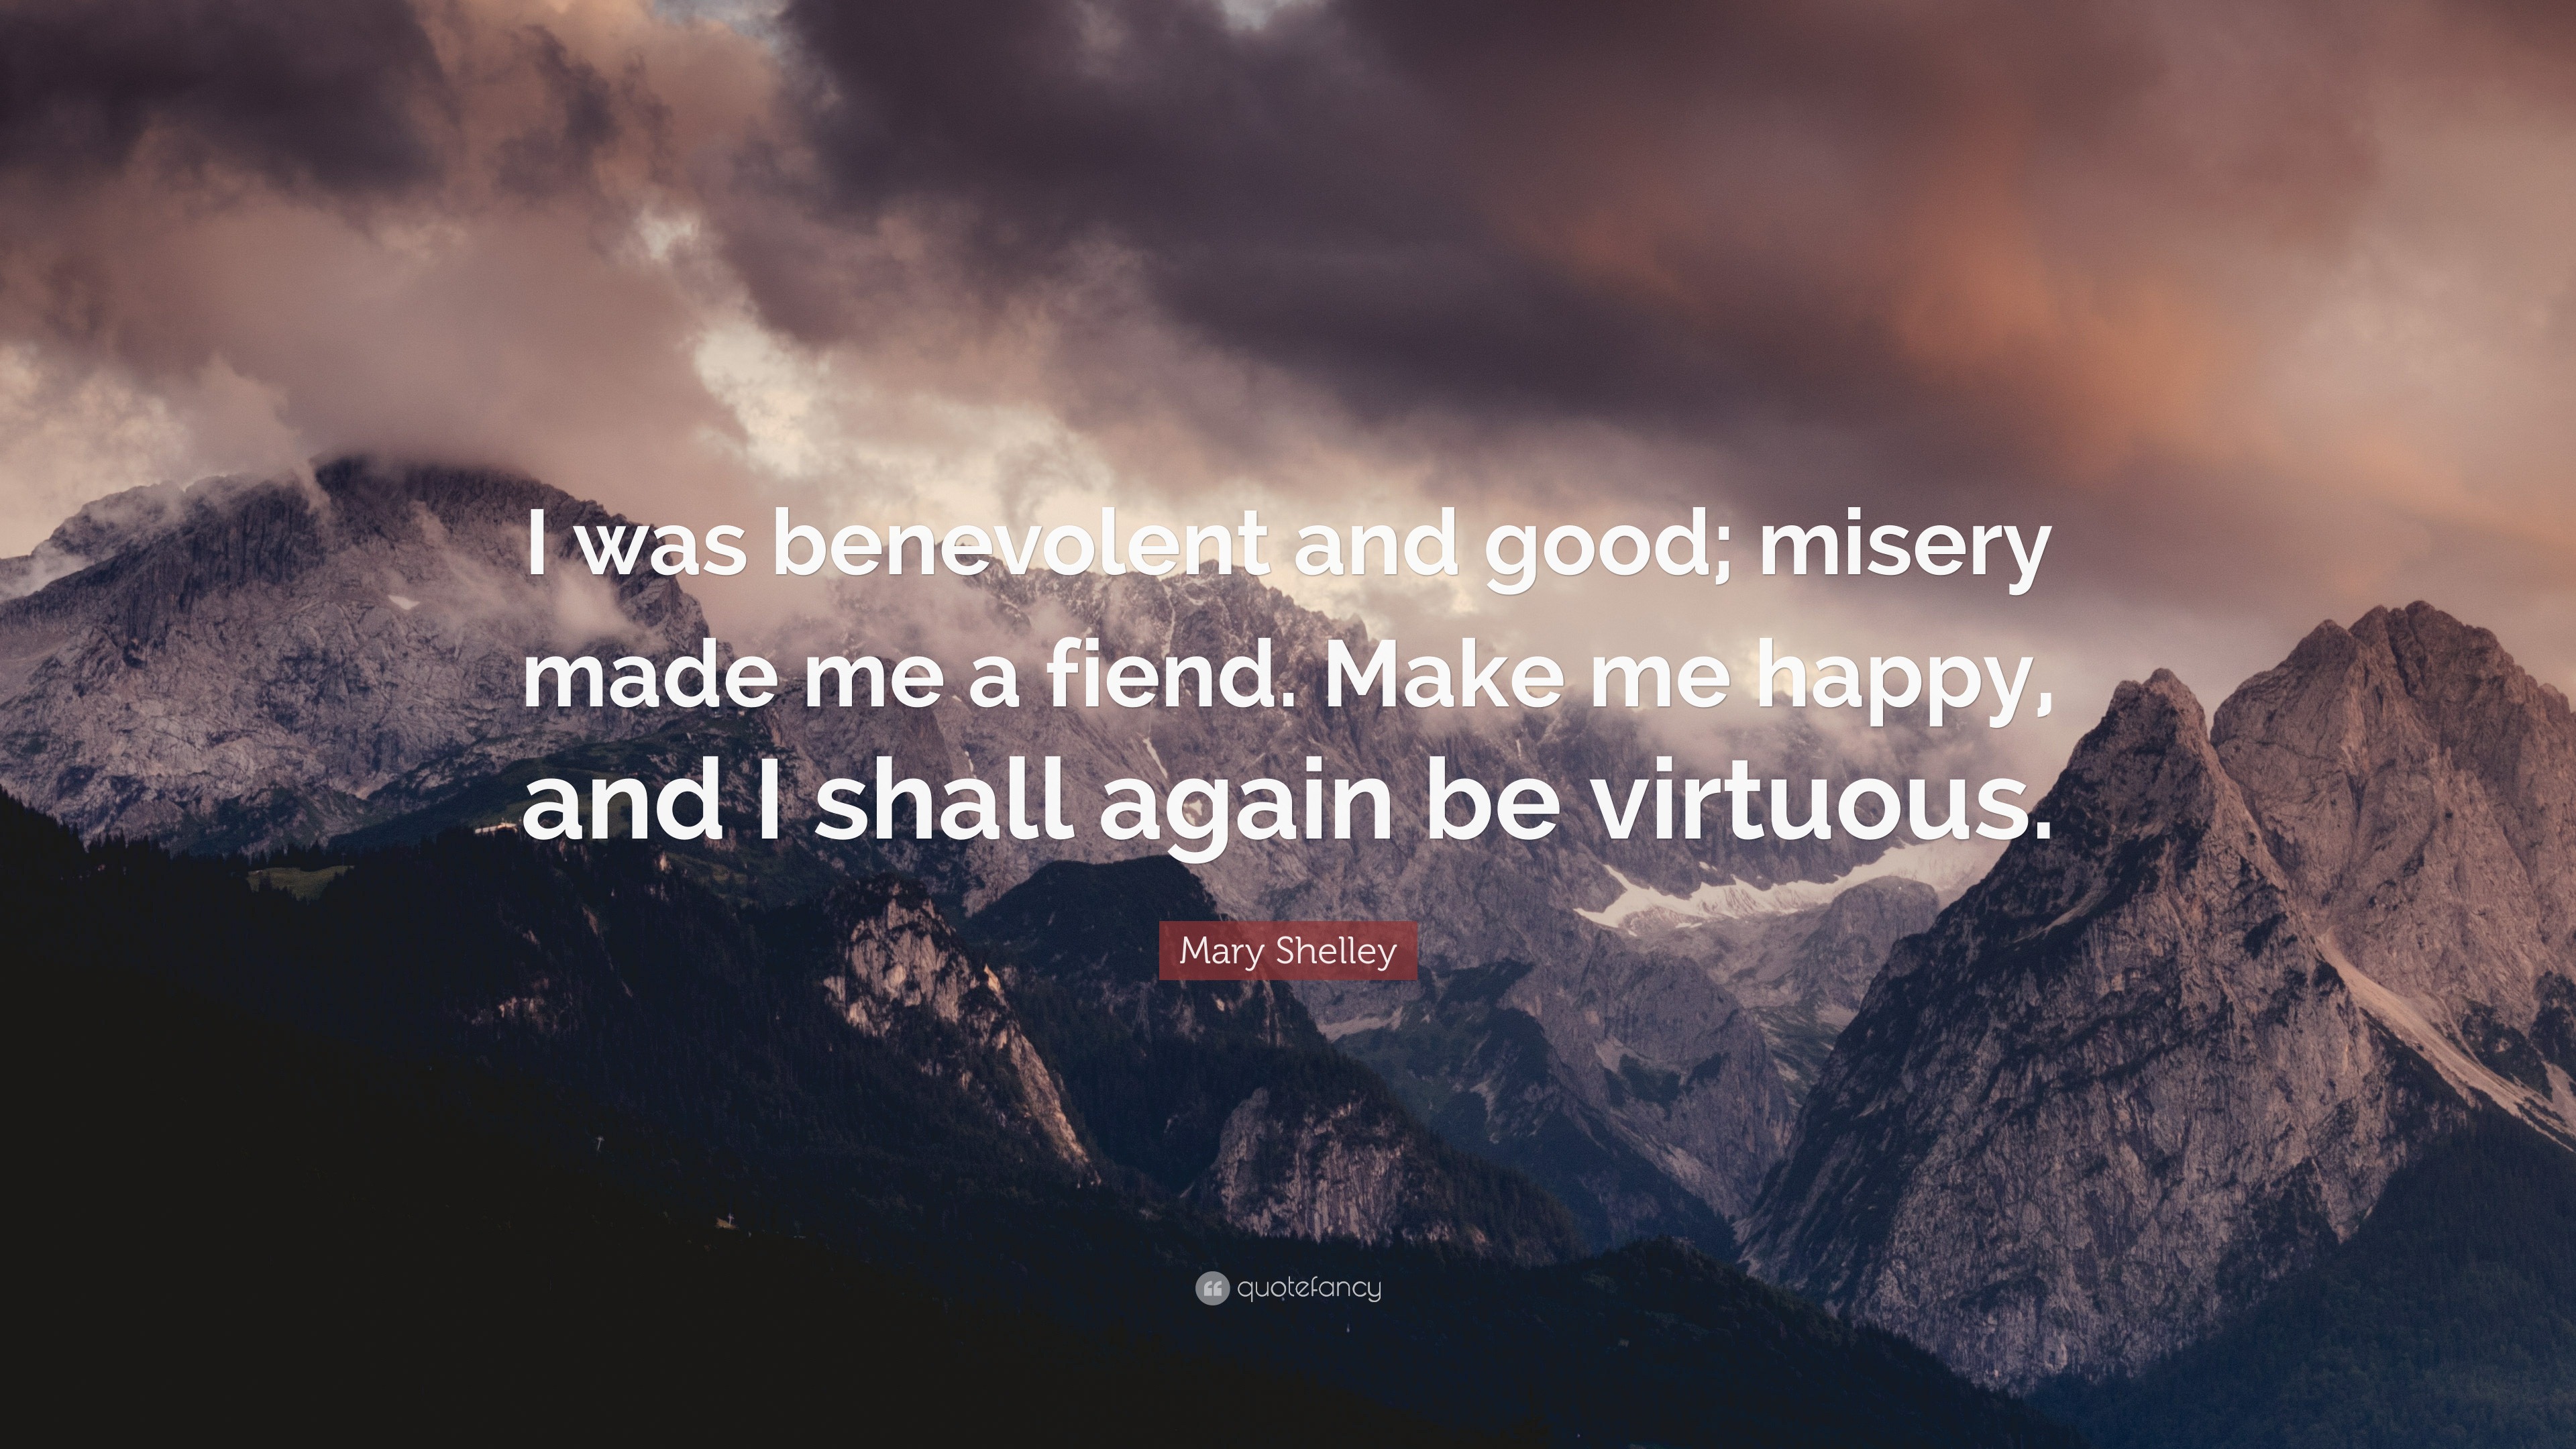 Mary Shelley Quote: “I was benevolent and good; misery made me a fiend